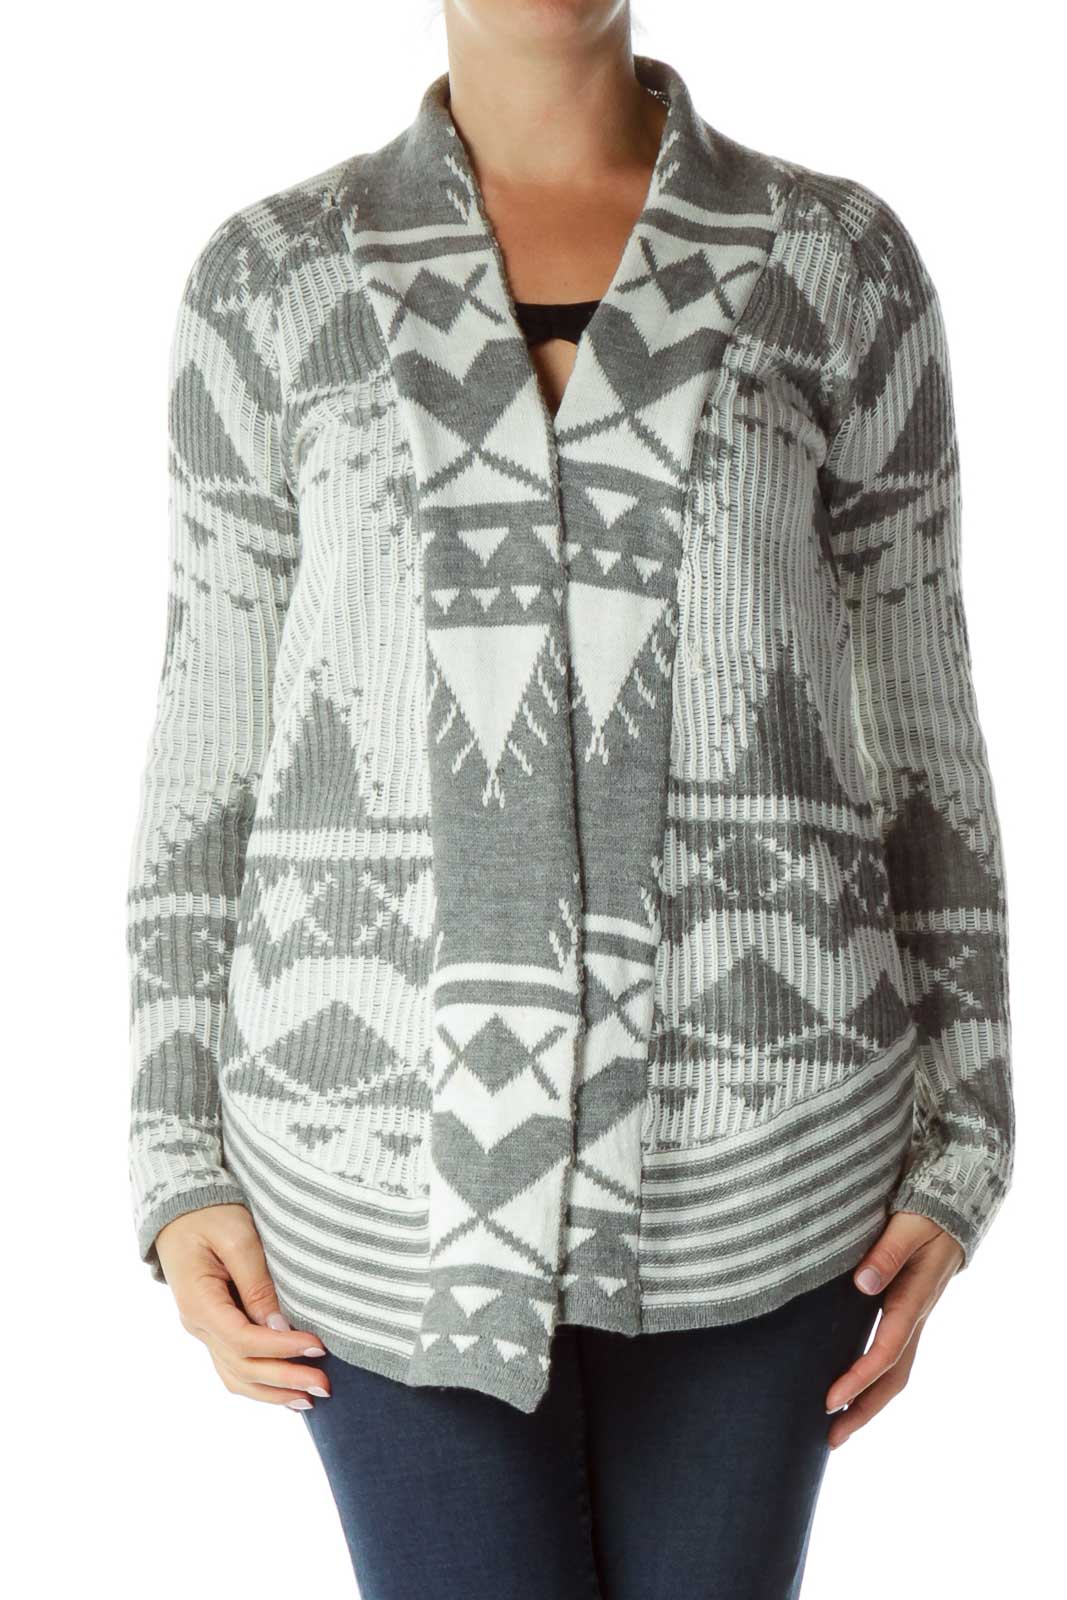 Gray White Printed Knit Sweater Front